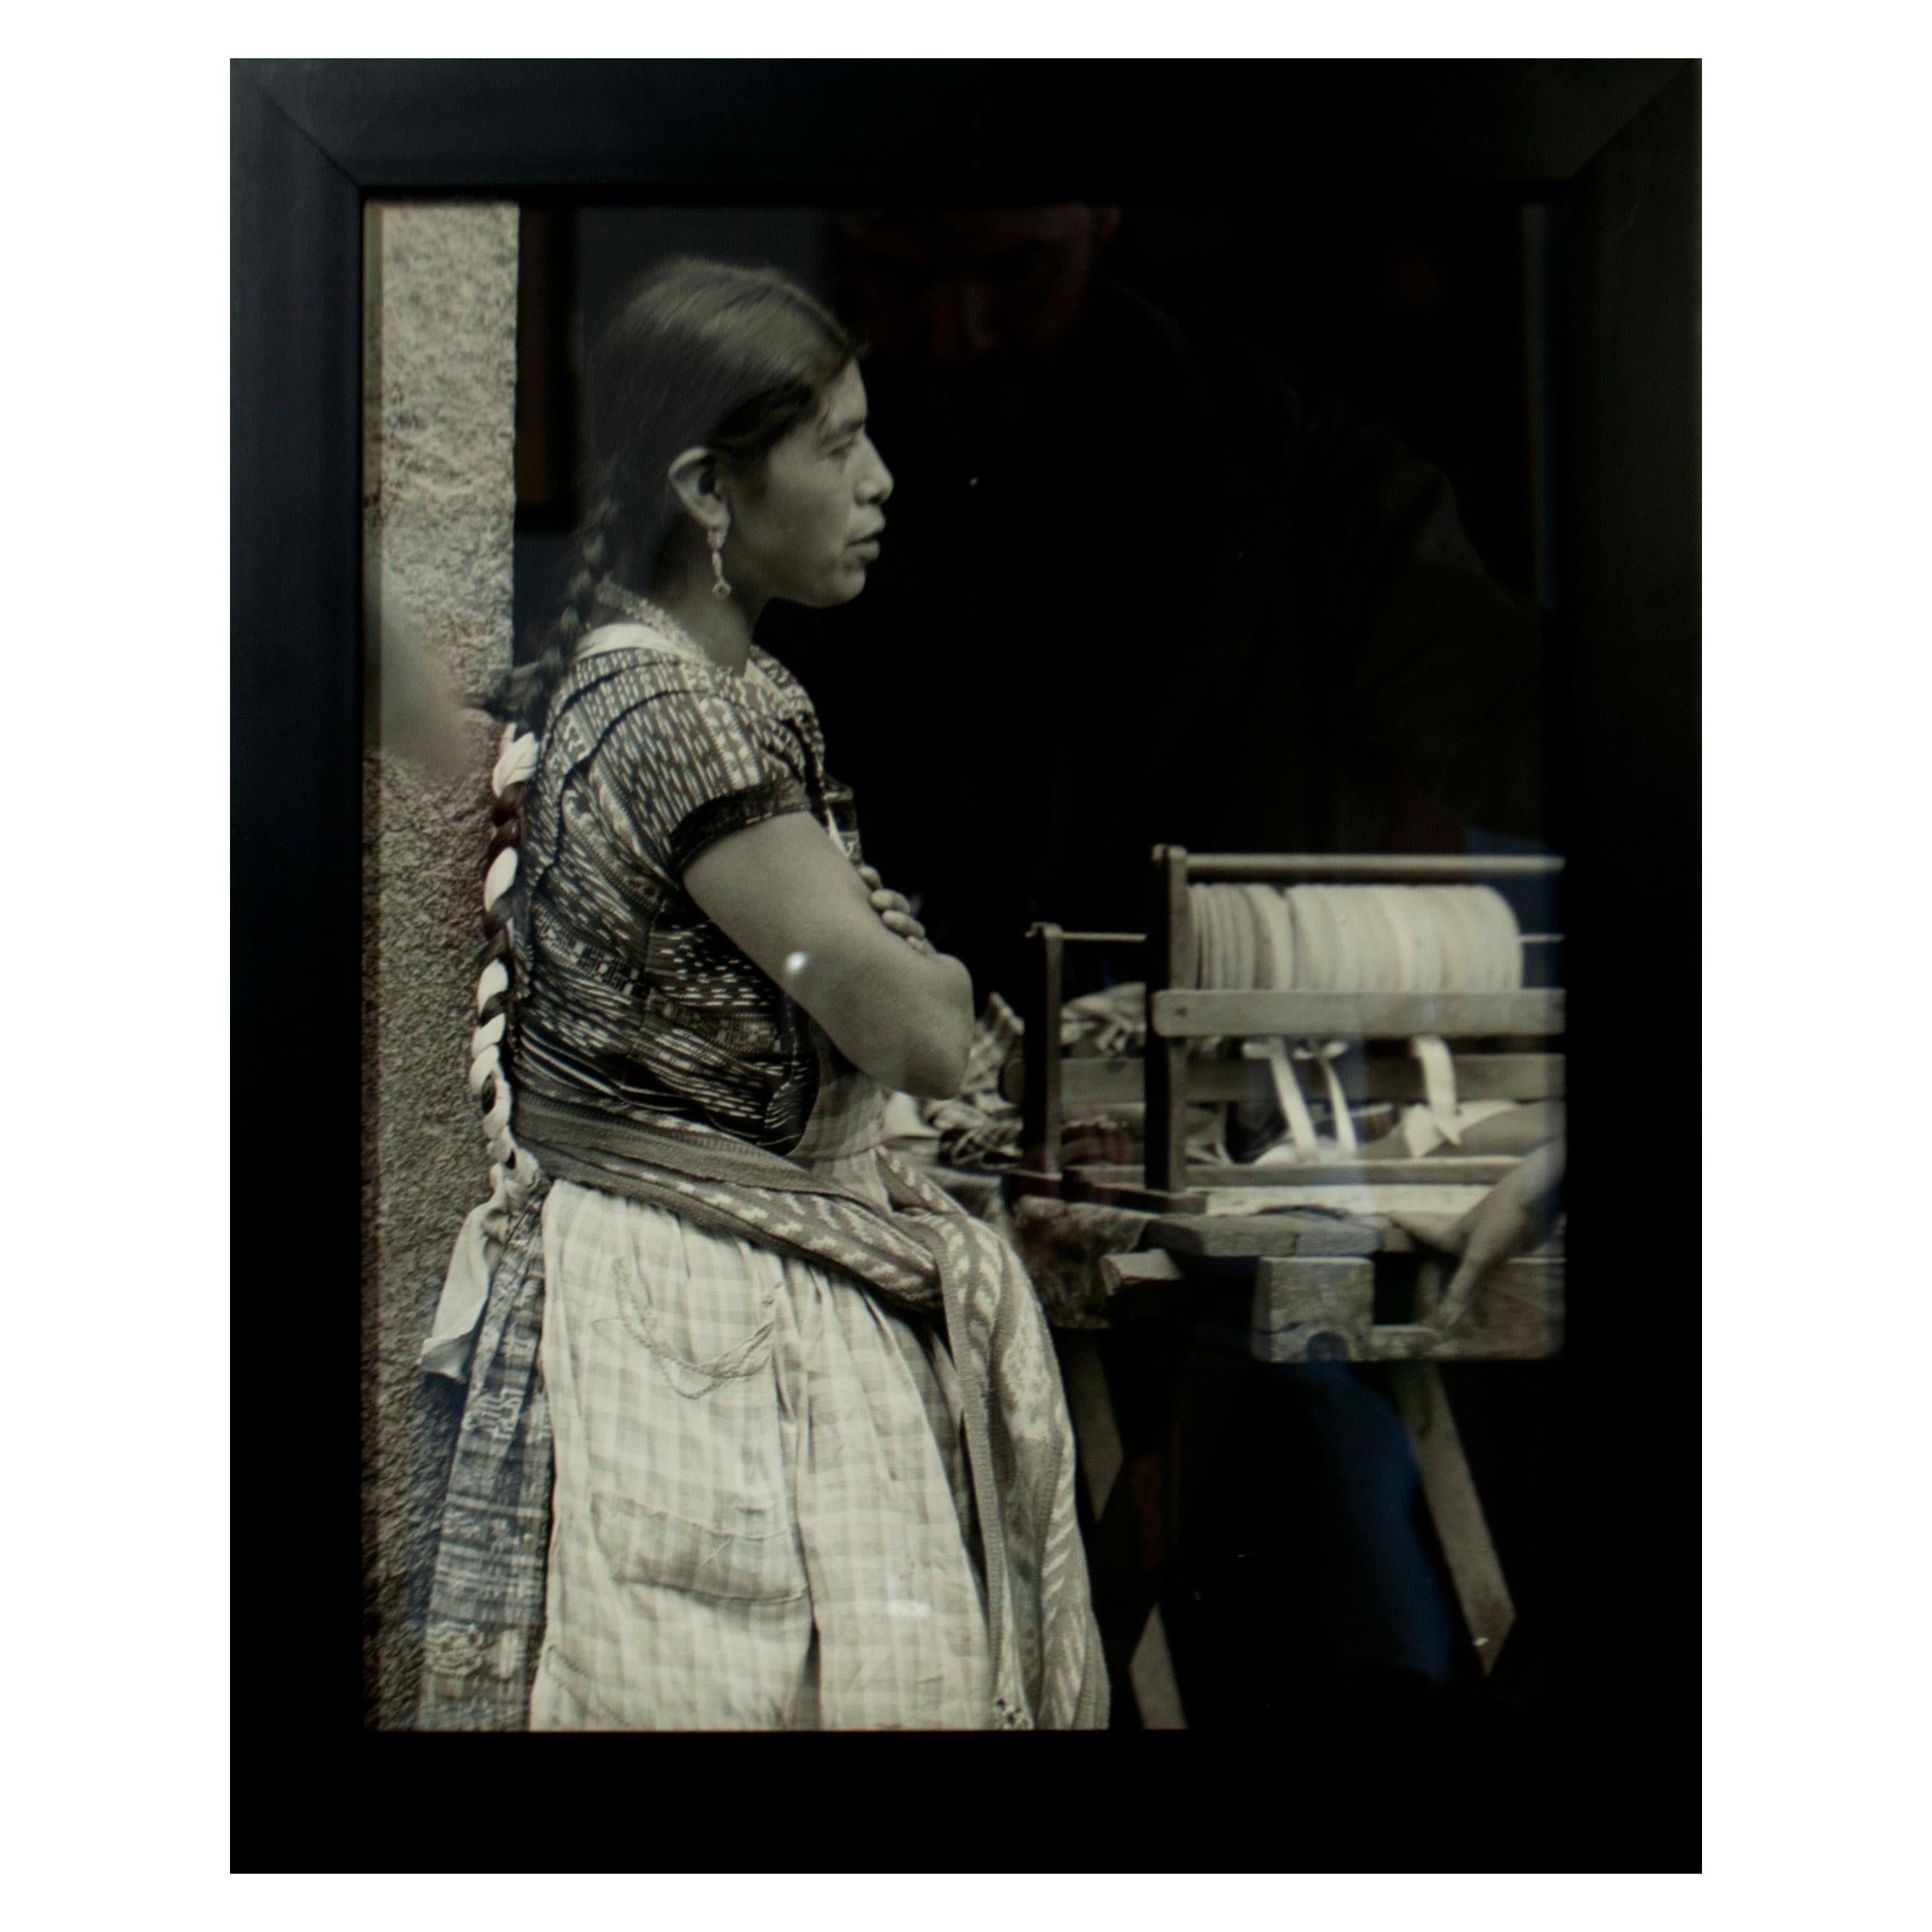 This 16"  x 13" black and white vintage photograph captures the side profile of an indigenous South American woman. The portrait is a 3/4 length portrait, depicting the figure from just above the knee and up, with her head positioned just slightly